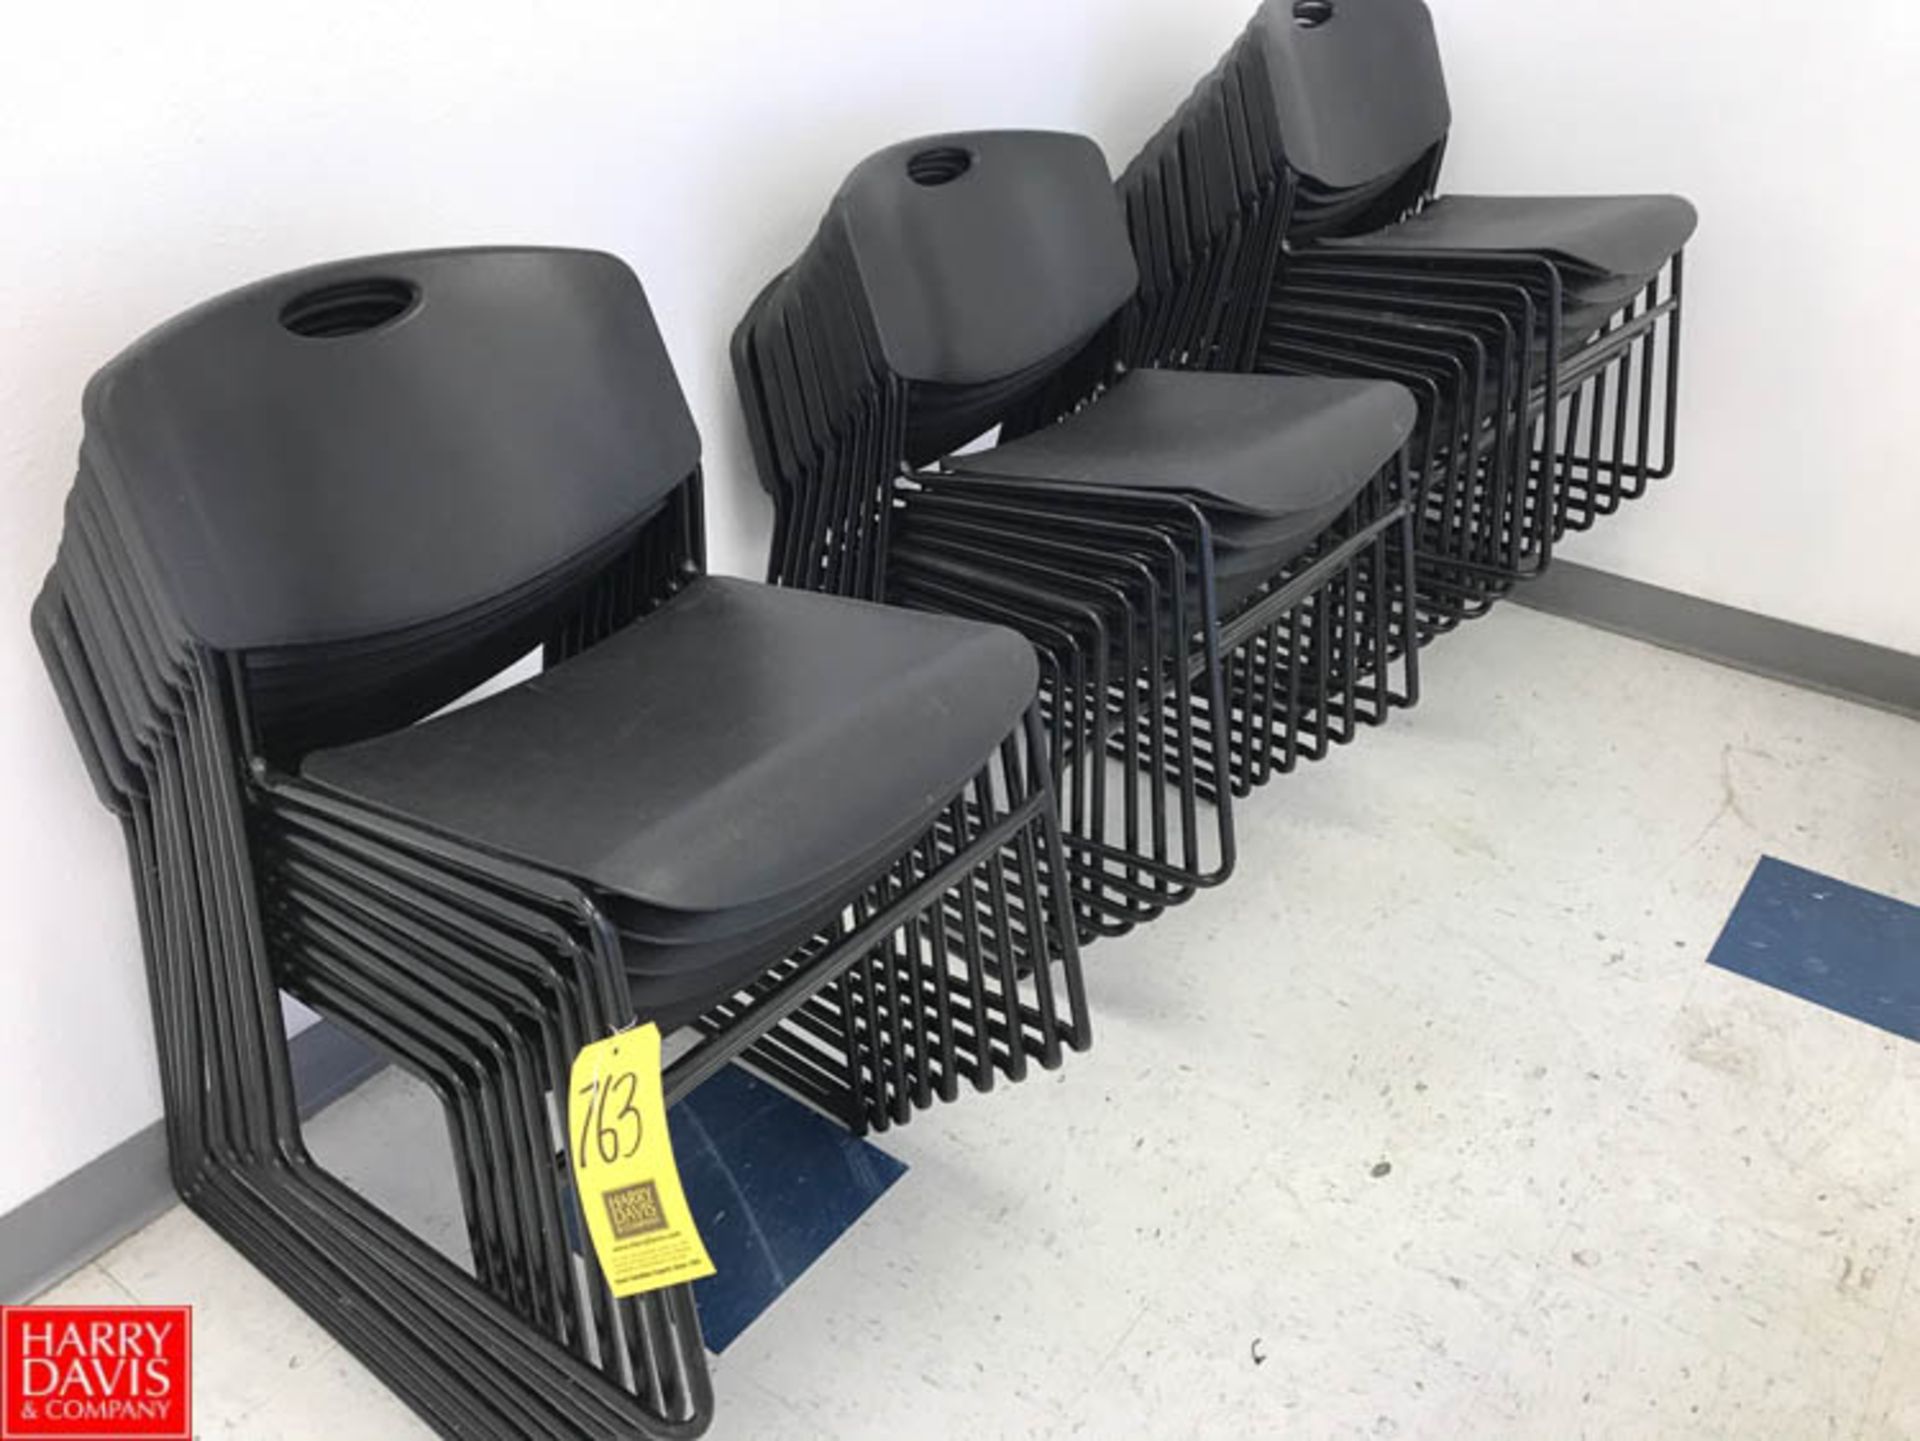 Black Stacking Chairs